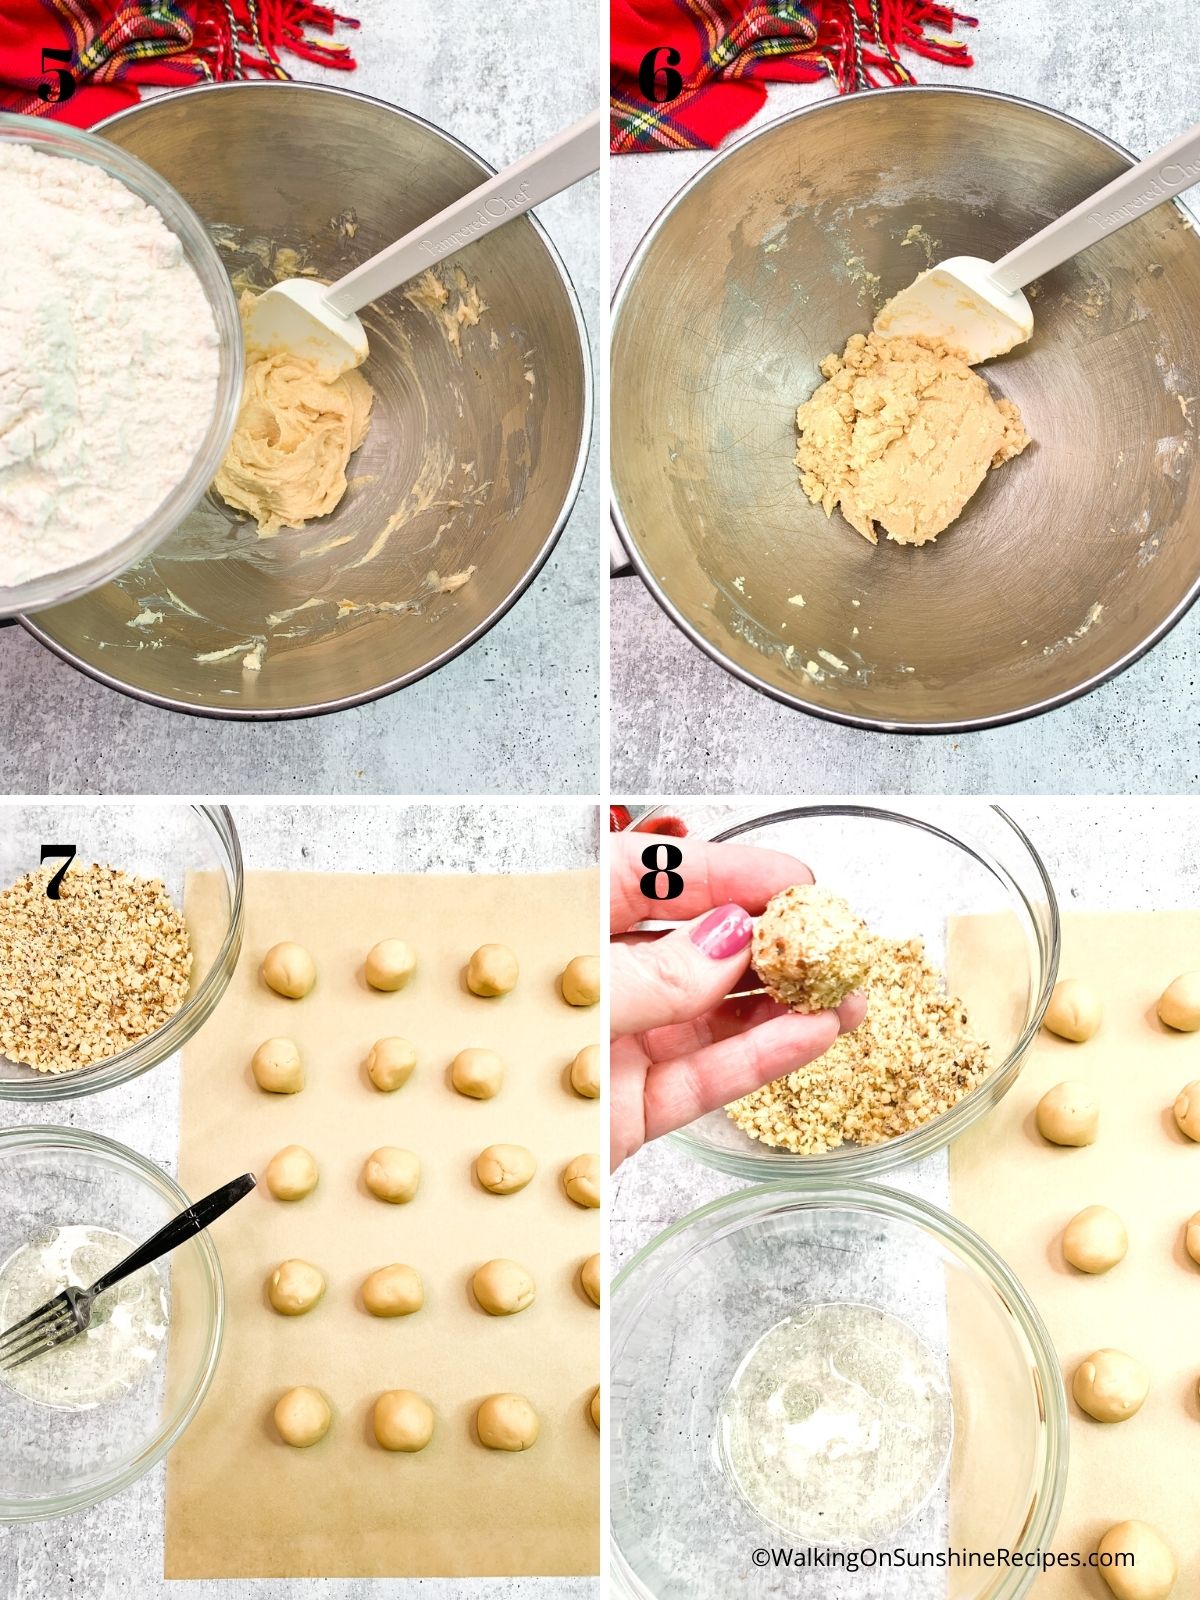 Dry ingredients and shape the dough balls.